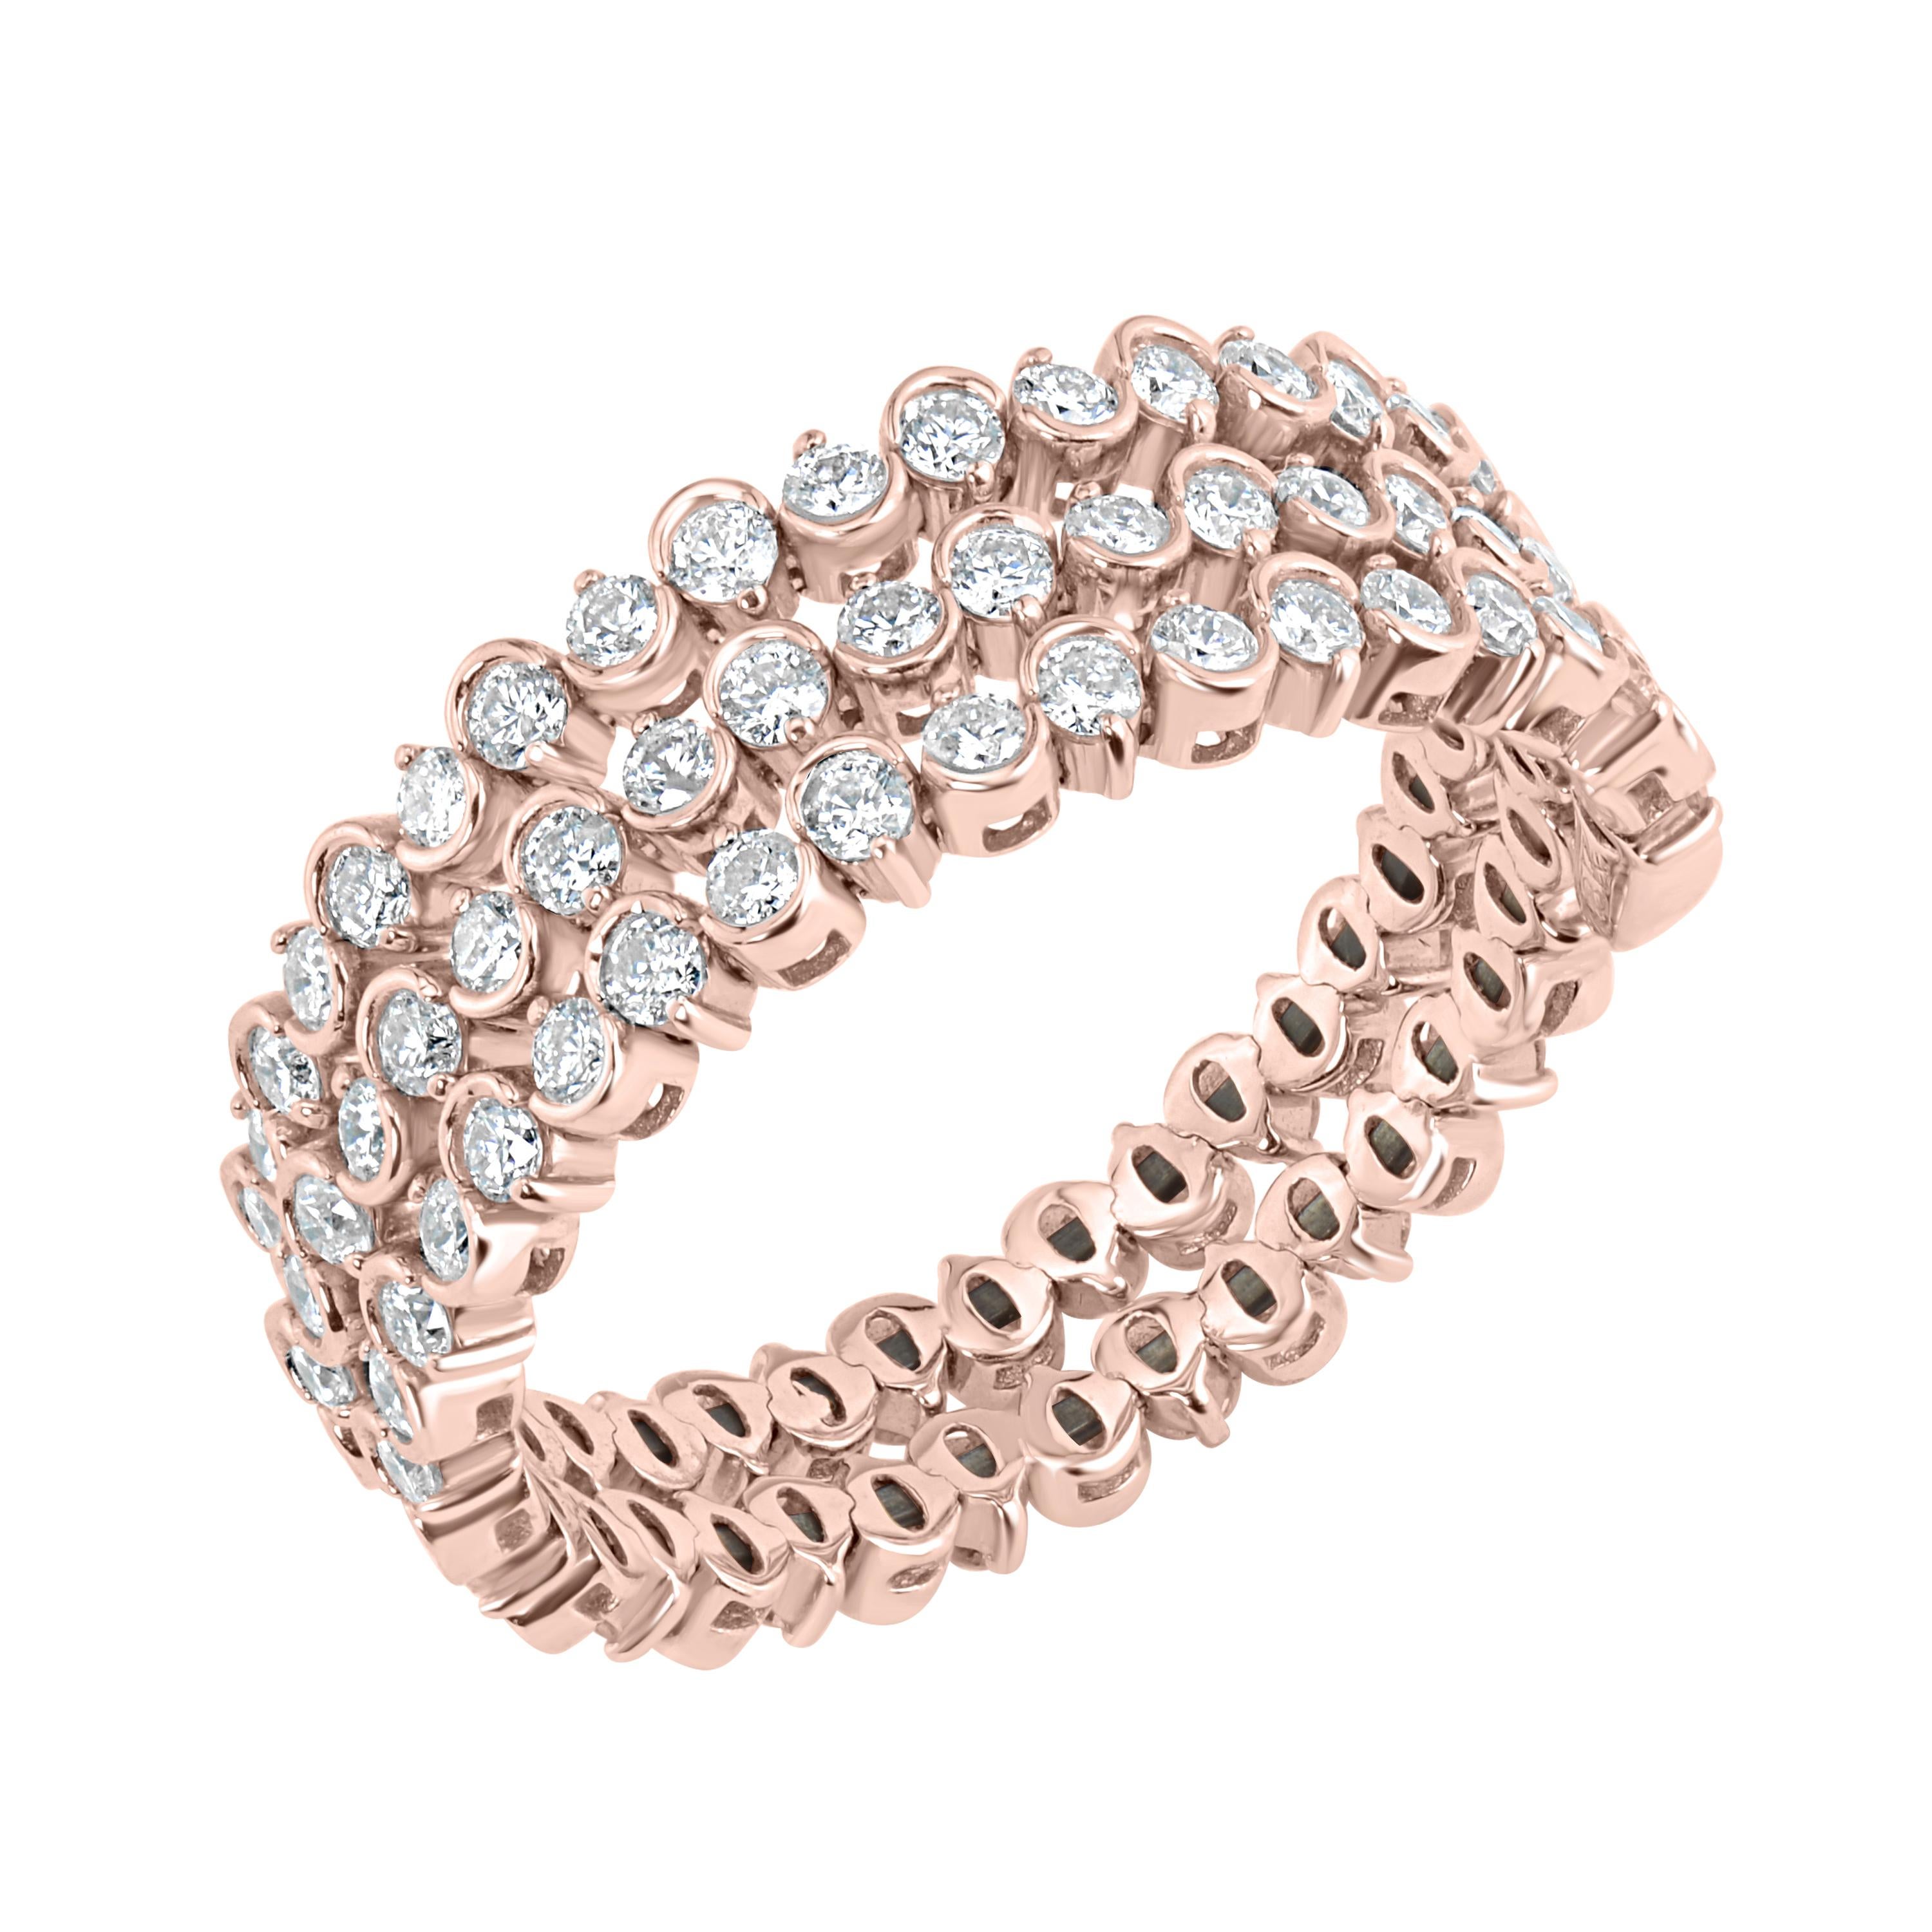 This band ring is featured with round cut diamonds. Each ring is made with 93 round cut diamonds in shared prongs of 18K rose gold.

JEWELRY SPECIFICATION:
Approx. Metal Weight: 3.33 gram
Approx. Diamond Weight: 1.40 Cts
Diamond Shape/Cut: Round